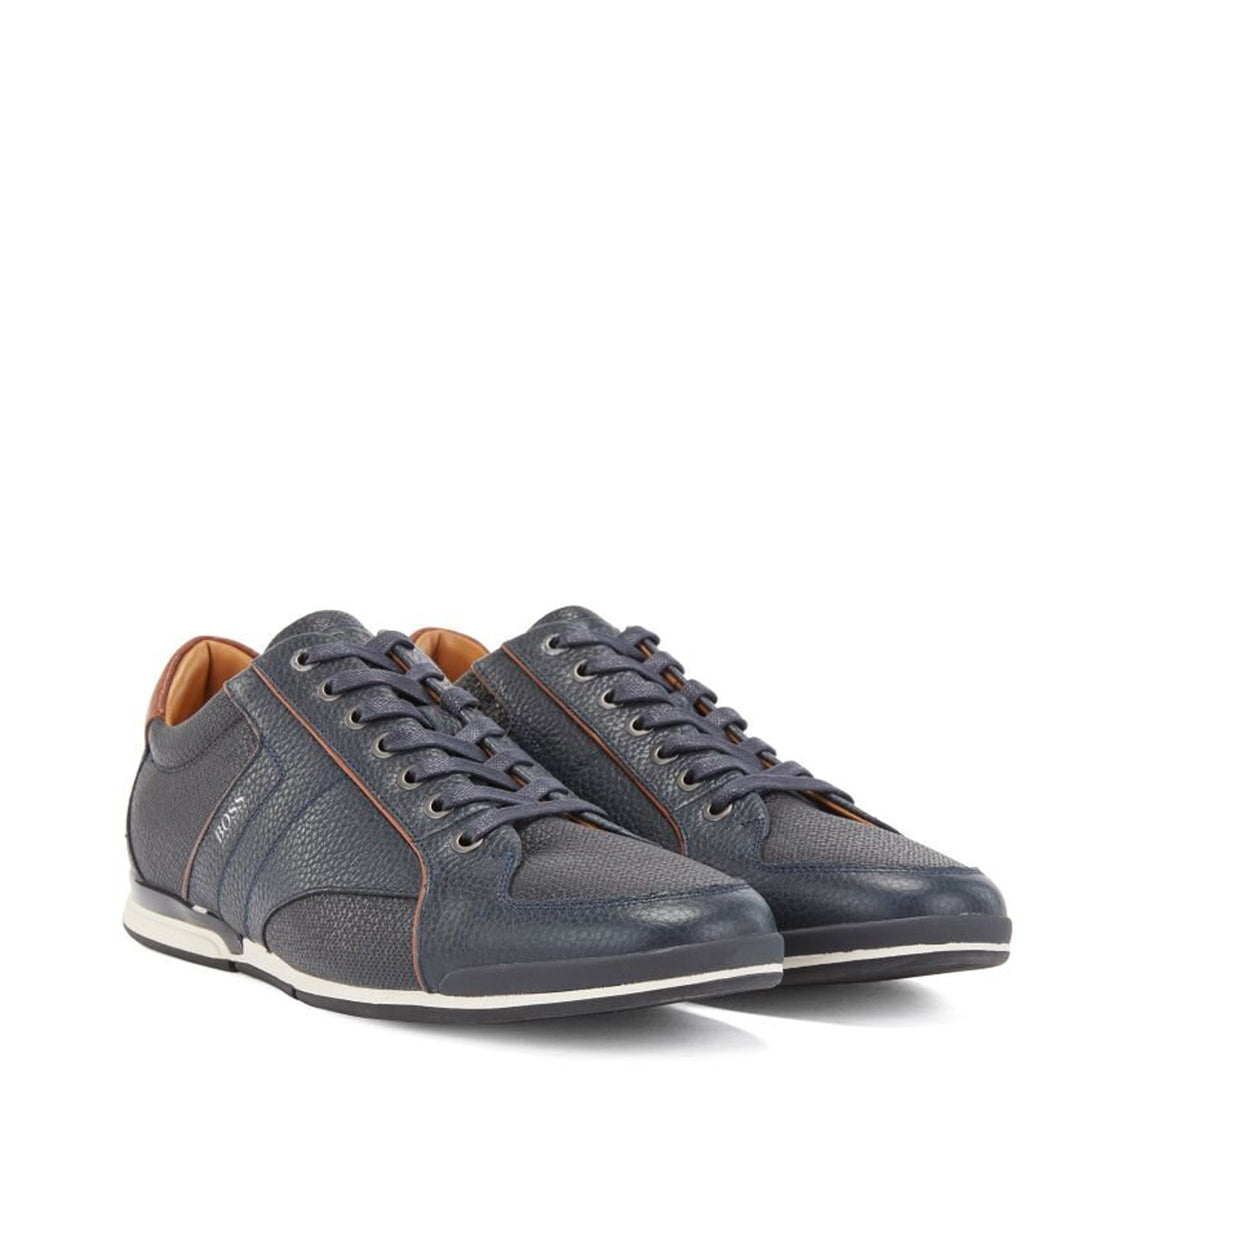 BOSS Blue Perforated Details Leather Trainers